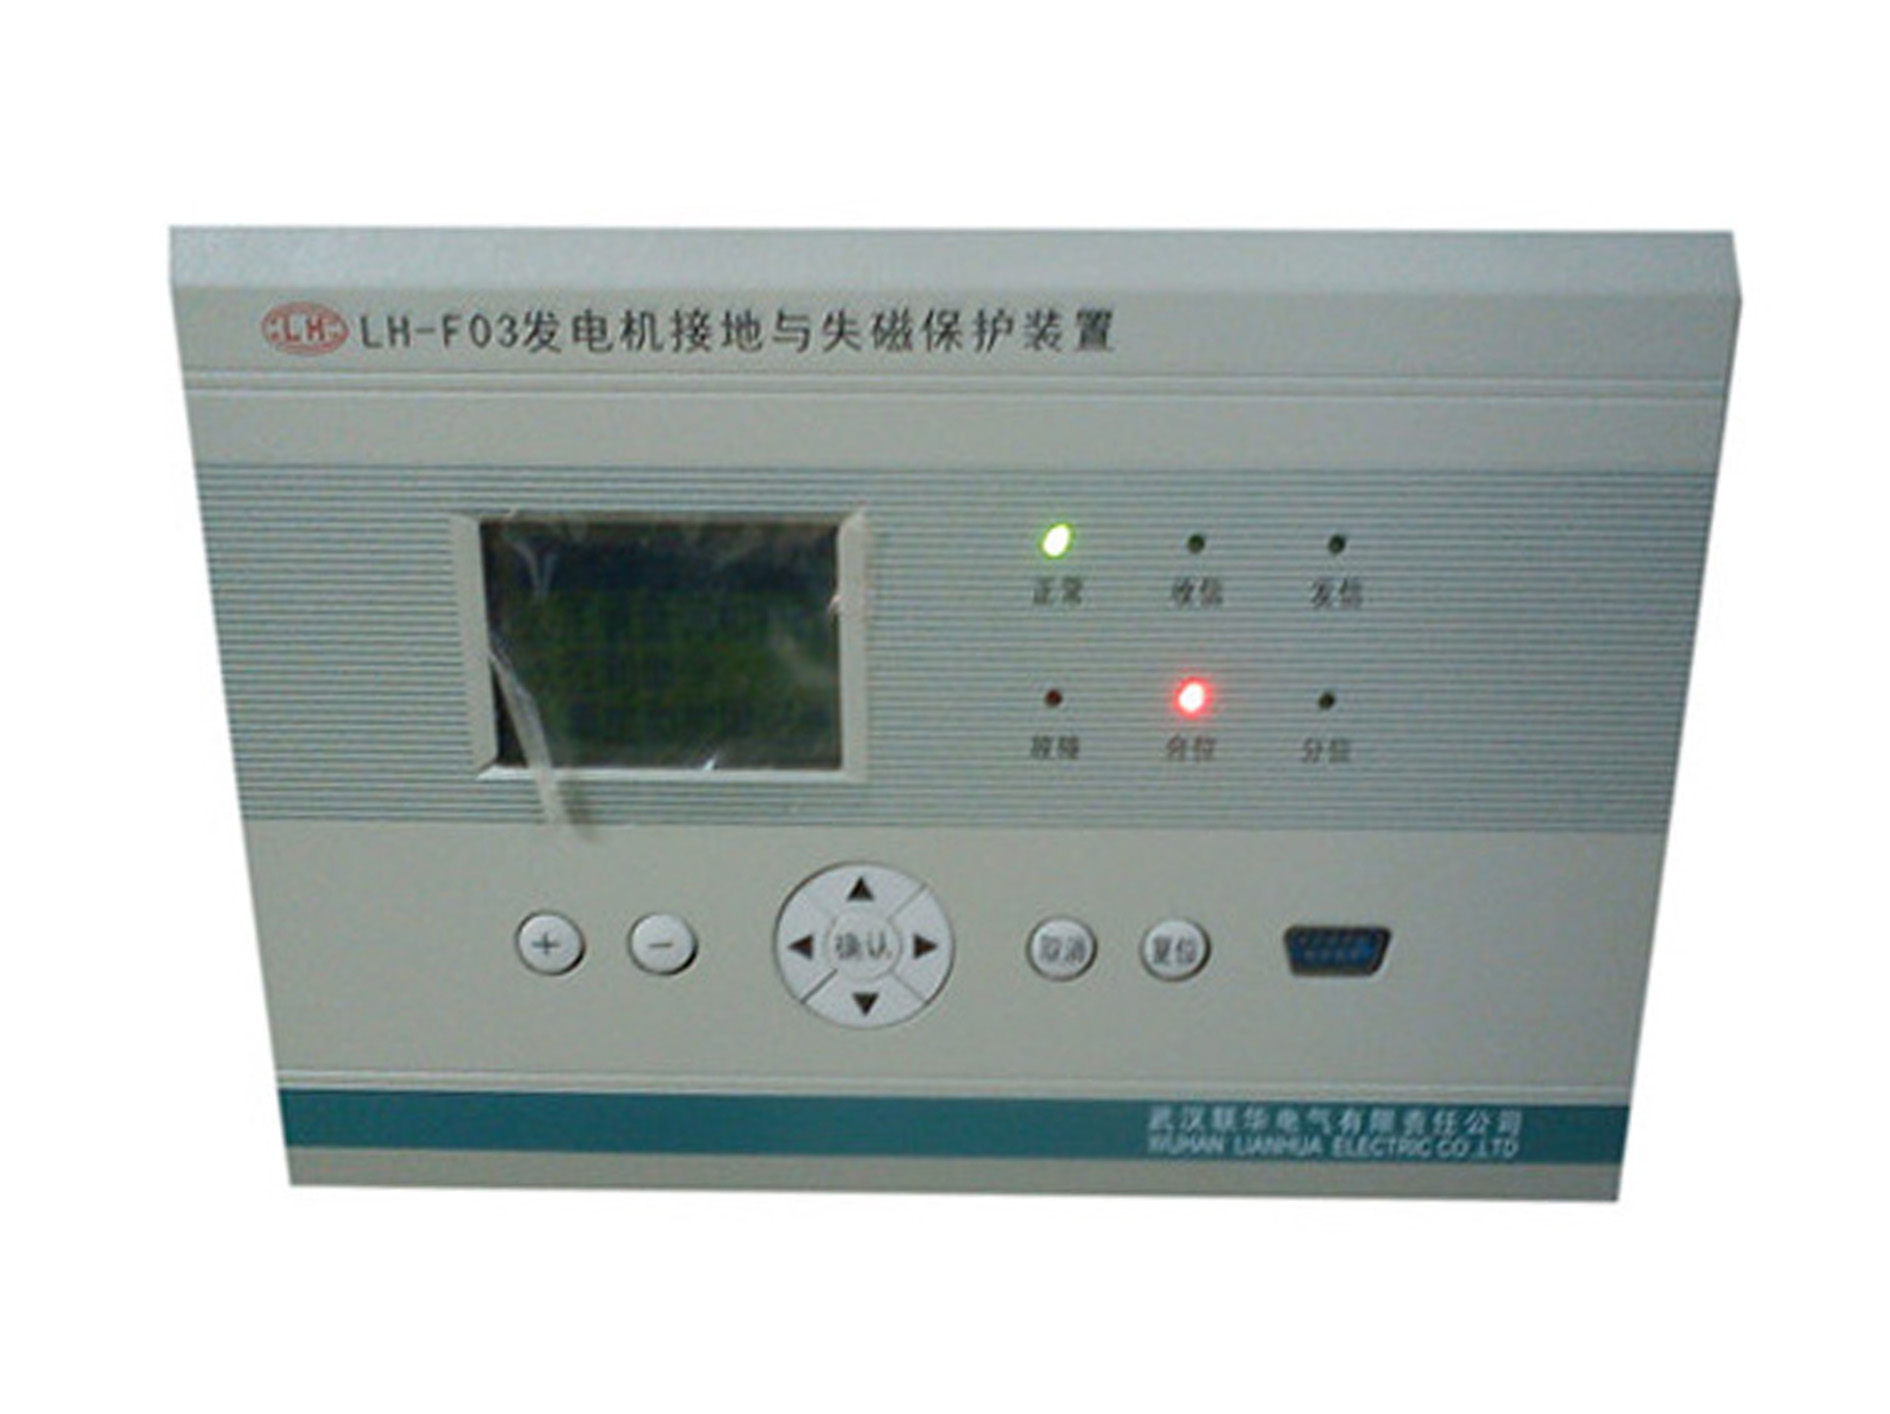 Generator grounding and loss of magnetic protection device, model LH-F03 / LH